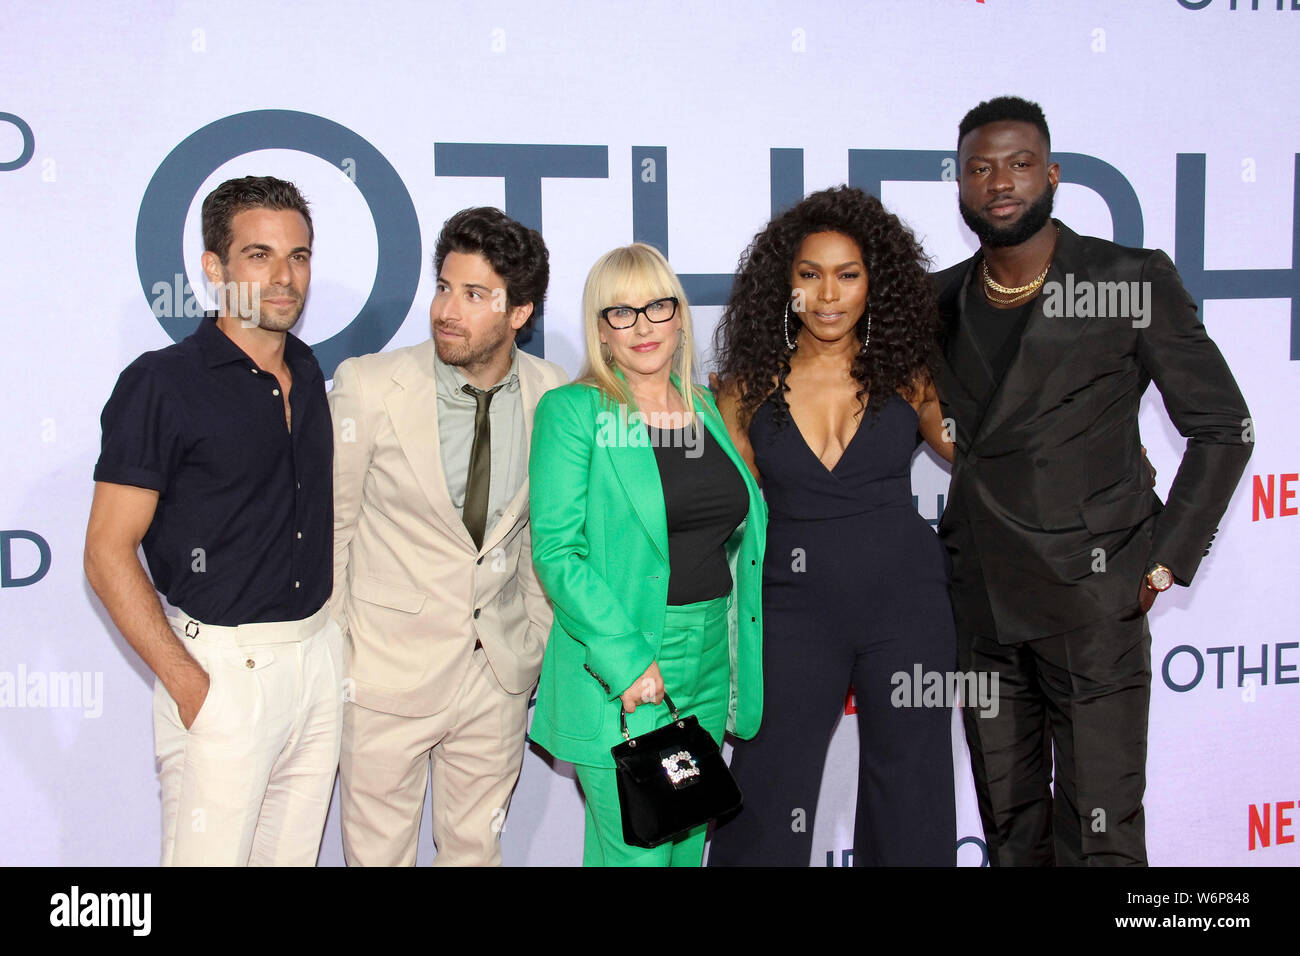 Frank De Julio, Jake Hoffman, Patricia Arquette, Angela Bassett and Sinqua  Walls at the Los Angeles Special Screening of Netflix's "Otherhood" held at  The Egyptian Theatre in Hollywood, CA, July 31, 2019.